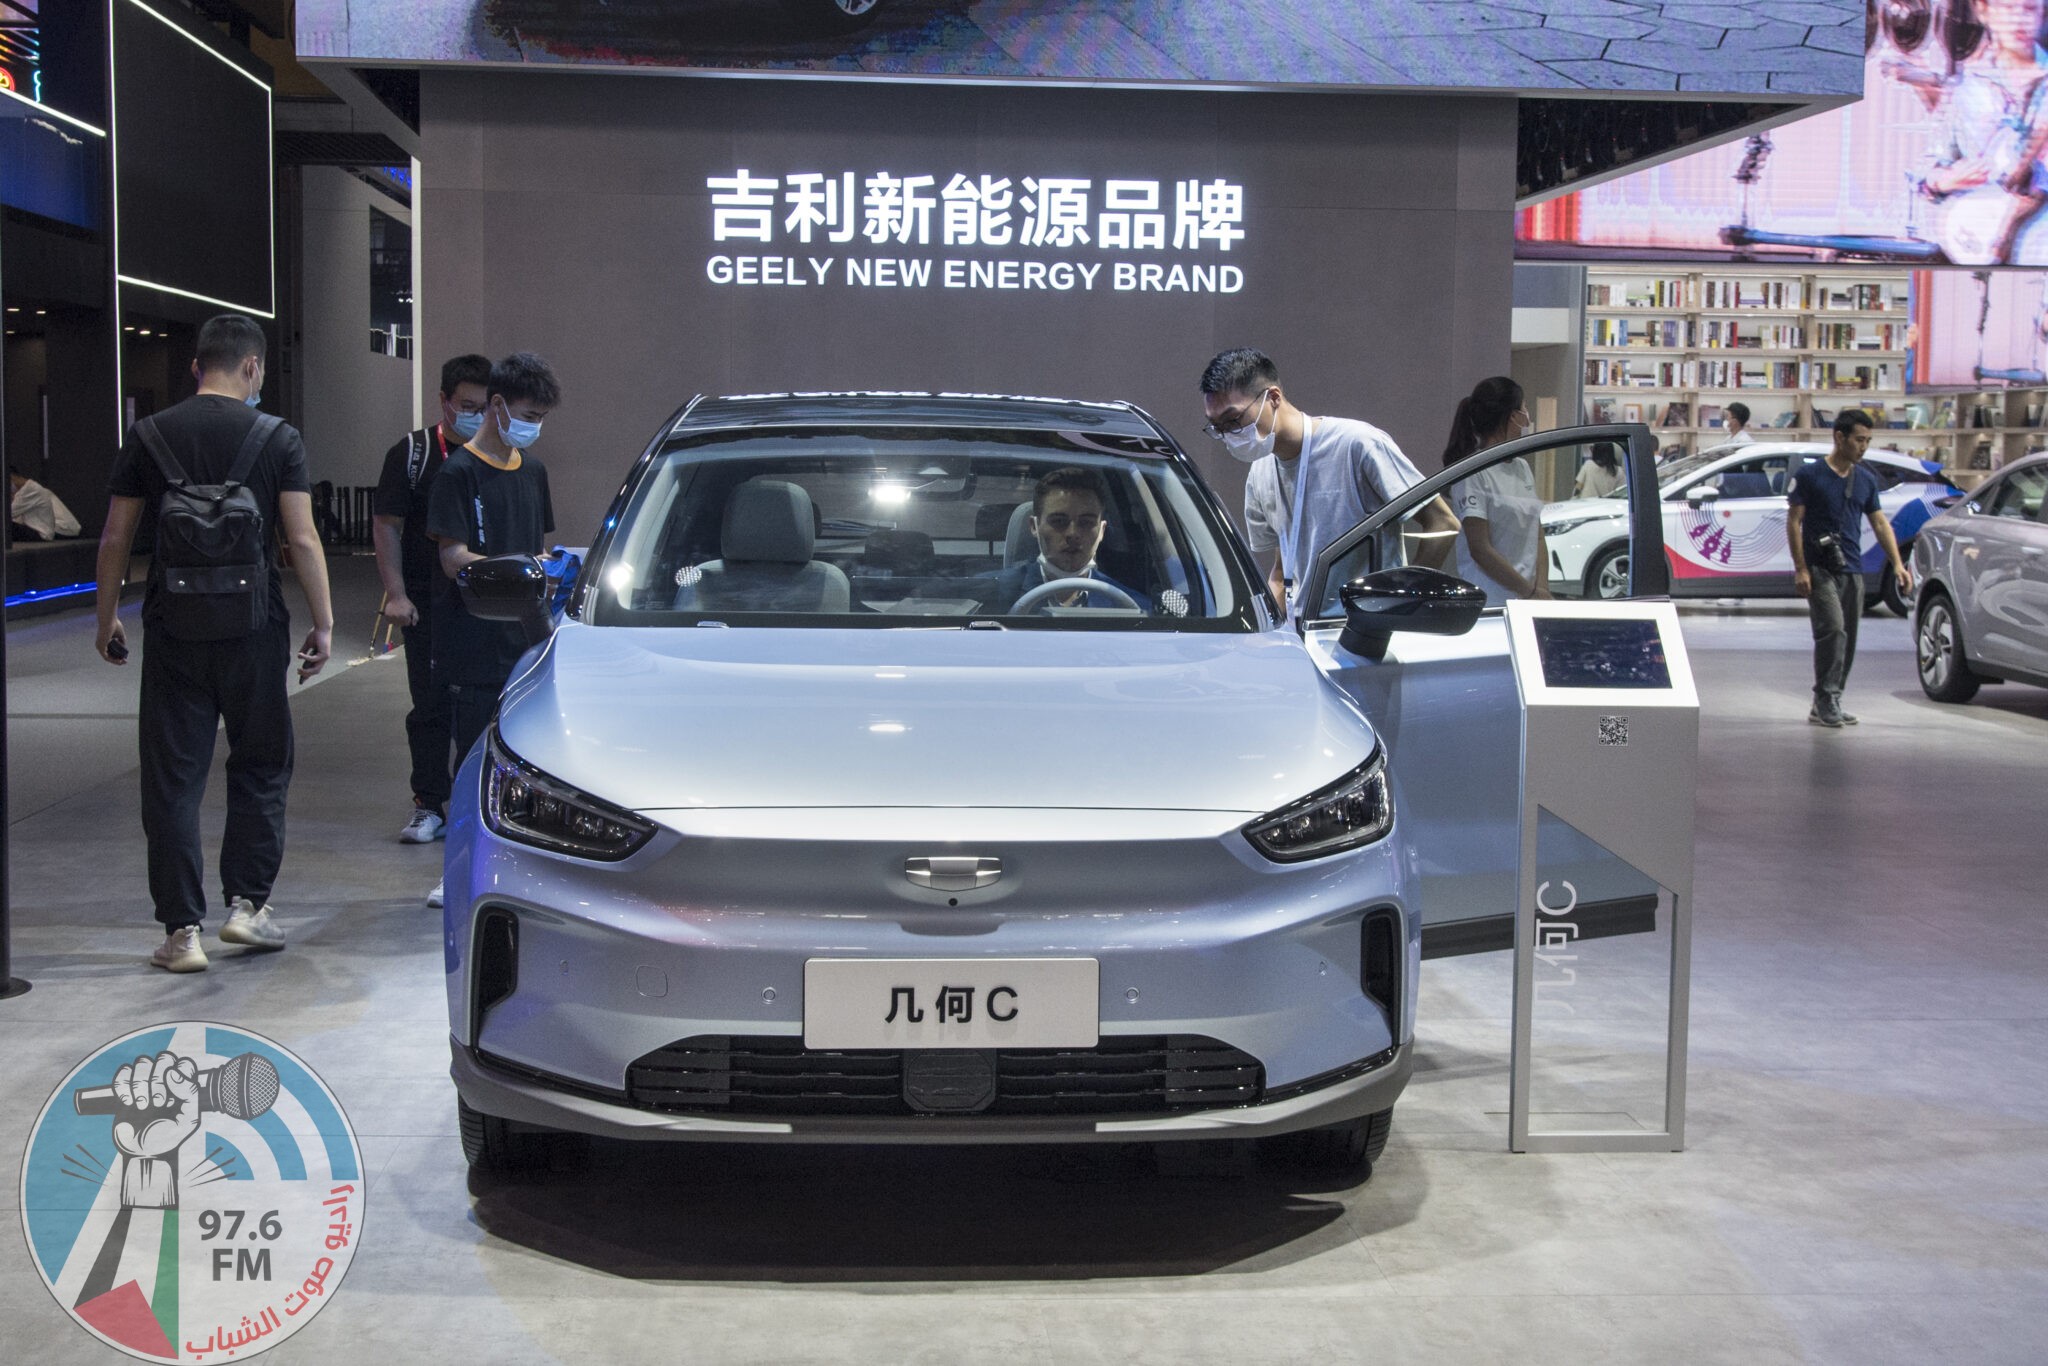 GUANGZHOU, CHINA - NOVEMBER 20: A Geely Geometry C electric car is on display during the 18th Guangzhou International Automobile Exhibition at China Import and Export Fair Complex on November 20, 2020 in Guangzhou, Guangdong Province of China. (Photo by VCG/VCG via Getty Images)